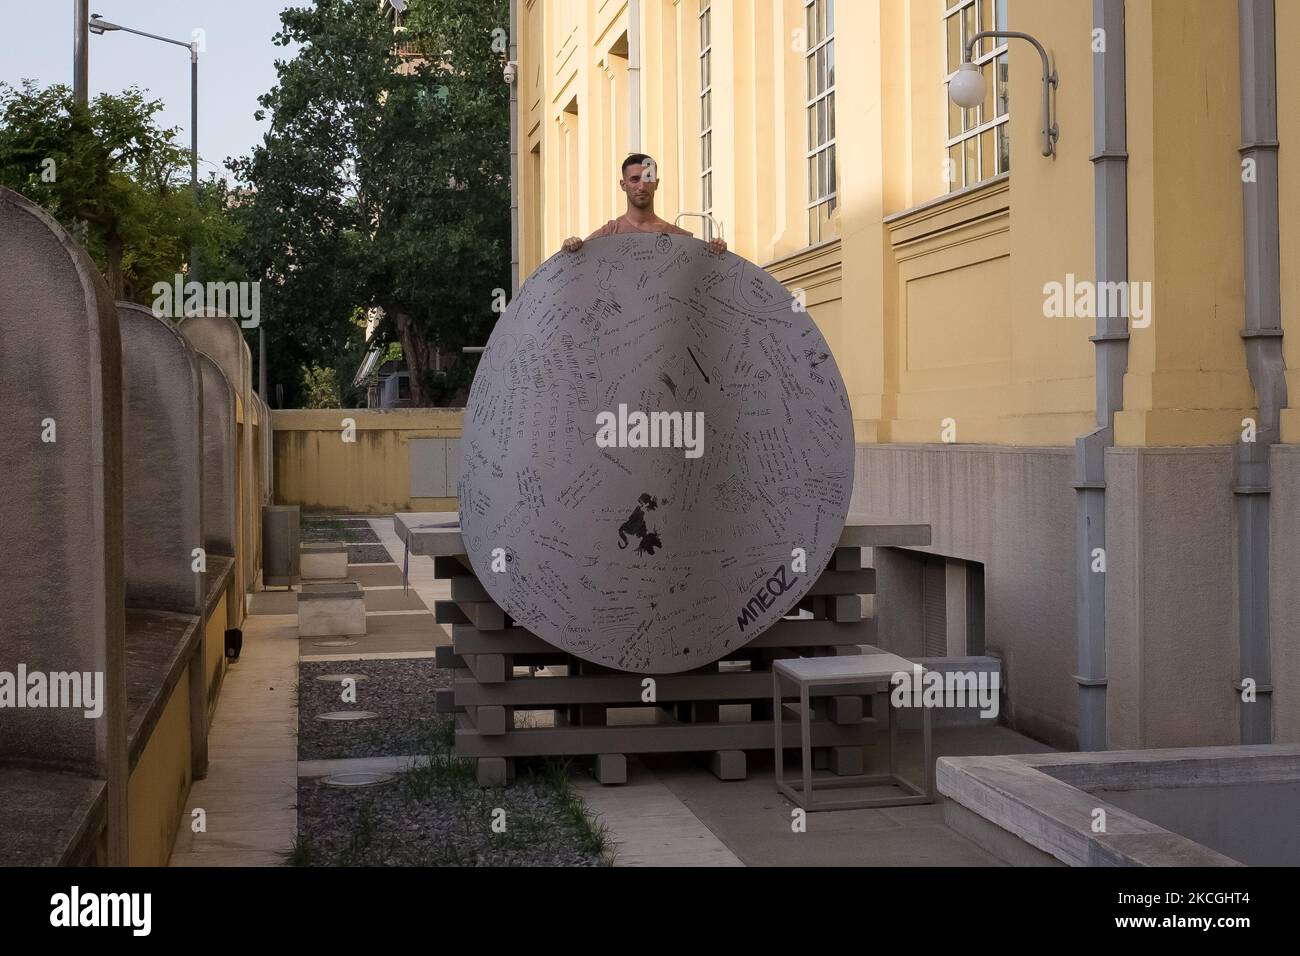 A performer seen doing his performance at the former Public Tobacco Factory in Athens, Greece on June 26, 2021. The performance was about human trust after COVID-19 (Coronavirus) carantine. (Photo by Nikolas Kokovlis/NurPhoto) Stock Photo